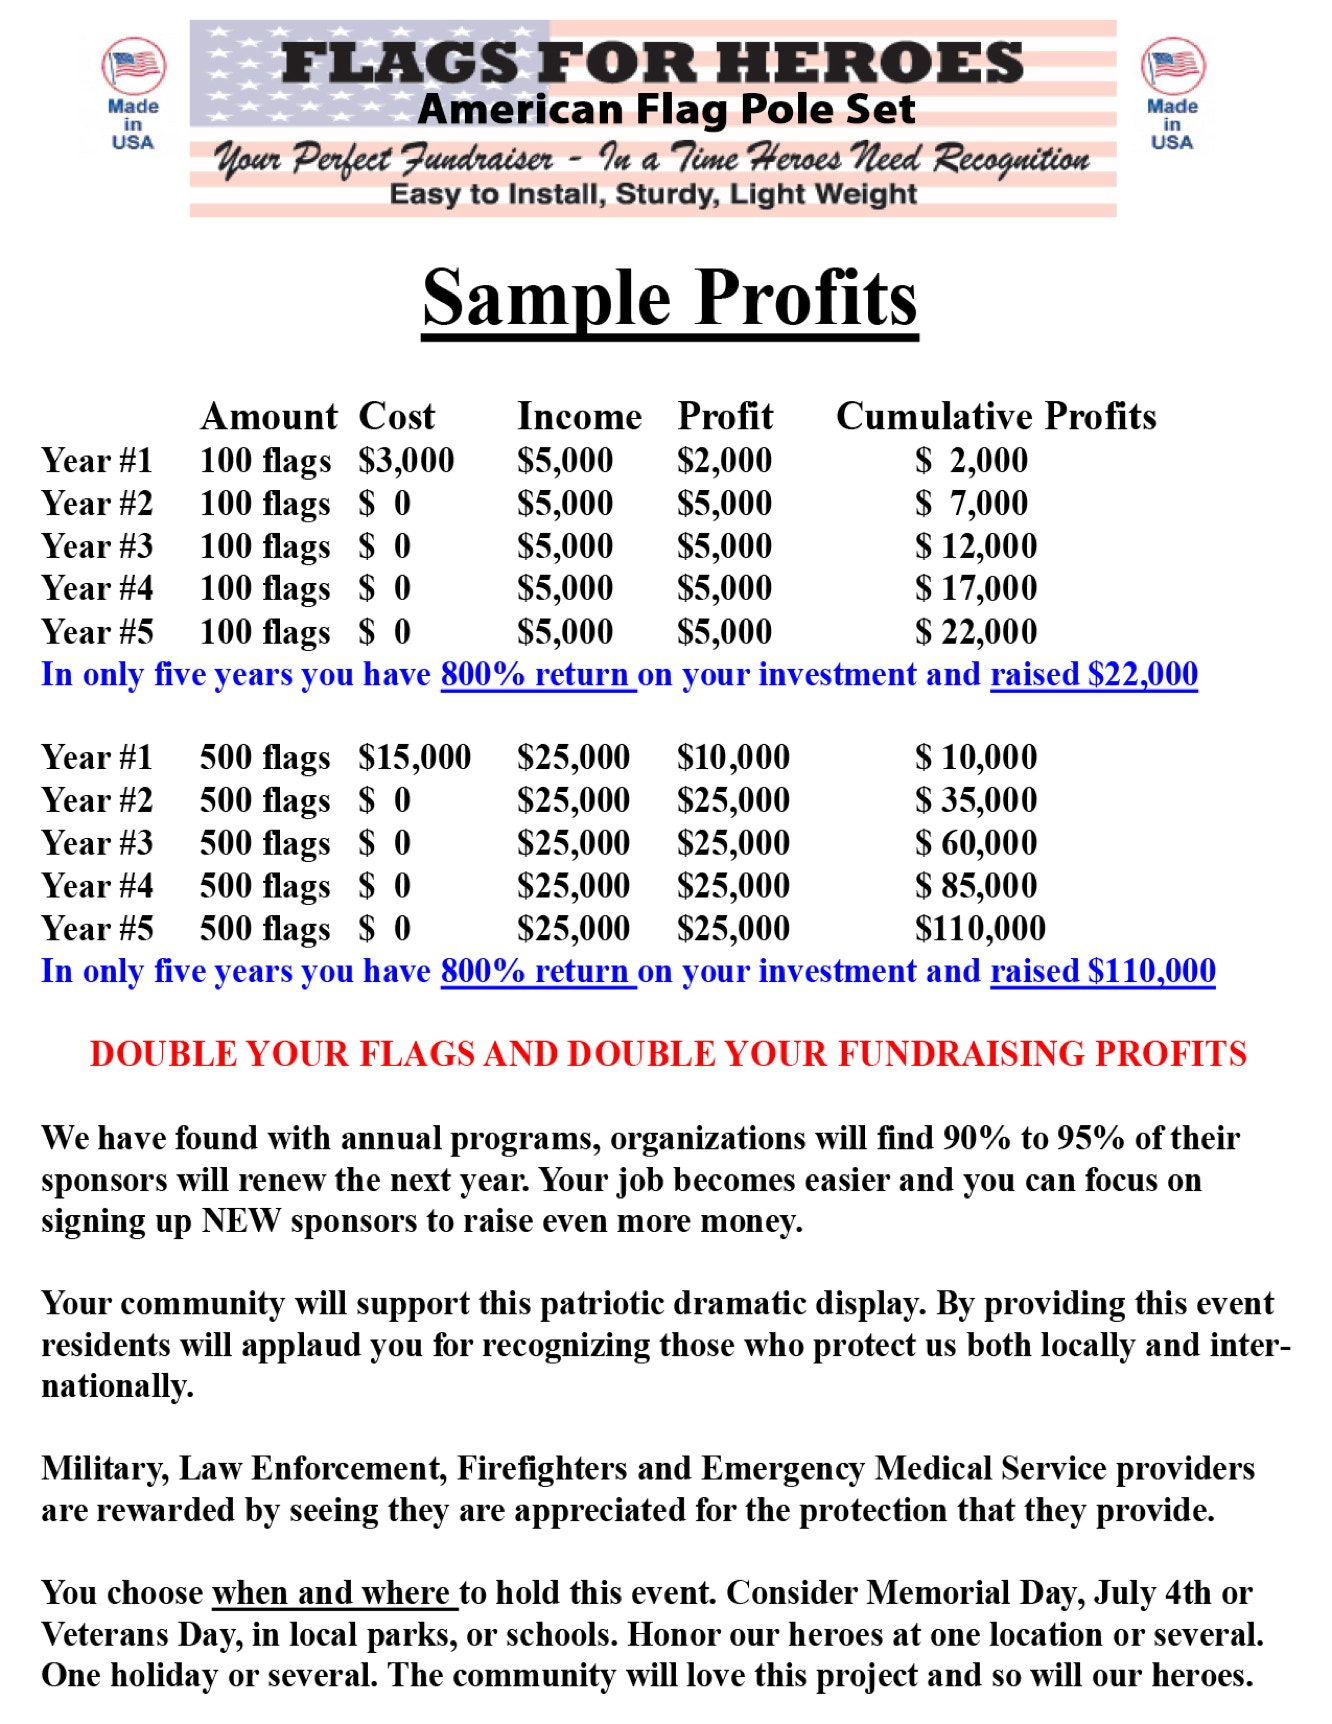 Flags for Heroes - American Flag Pole Set Sample profits document